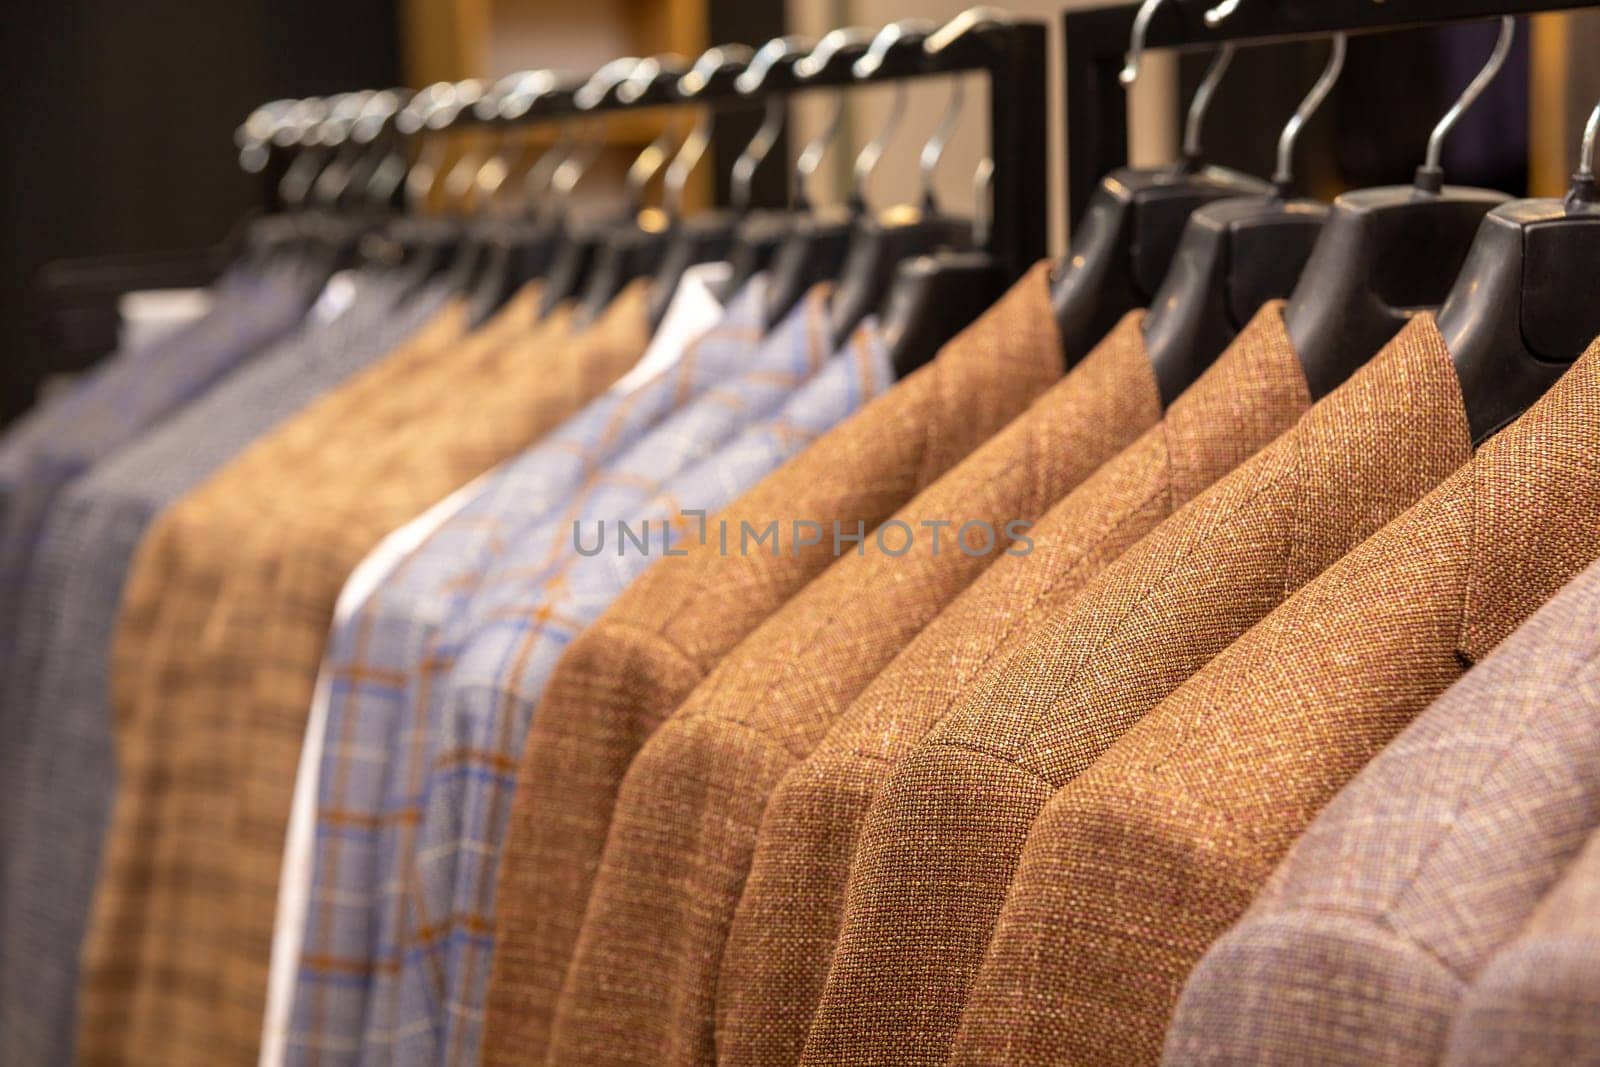 A row of men's suits, jackets hanging on a rack for display. Elegant man suit jackets hanging in a row with close up of sleeve and buttons.